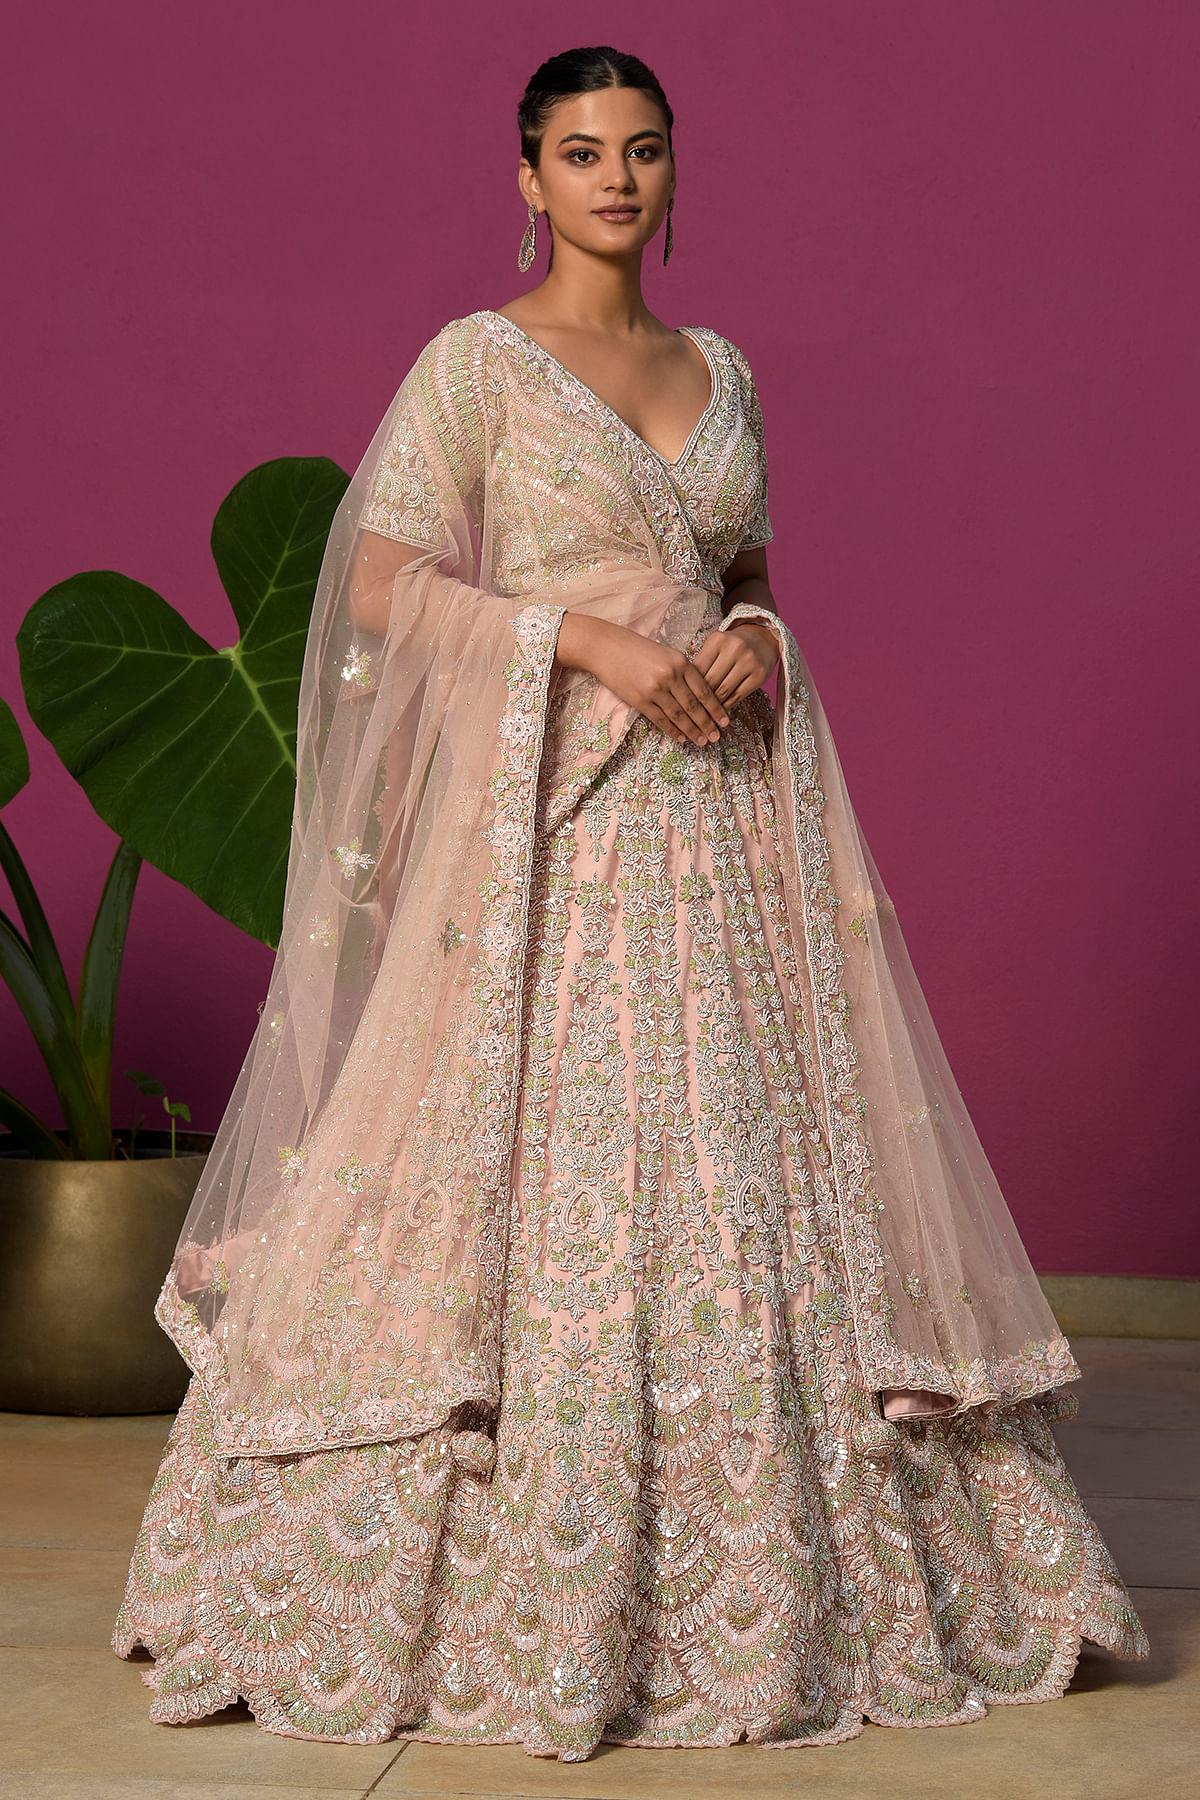 Bride Chose A Baby Pink Hued Lehenga And Styled It With 'Kundan' Jewellery  To Add A Pop Of Colour | Indian beauty saree, Indian designer wear, Bridal  makeup images